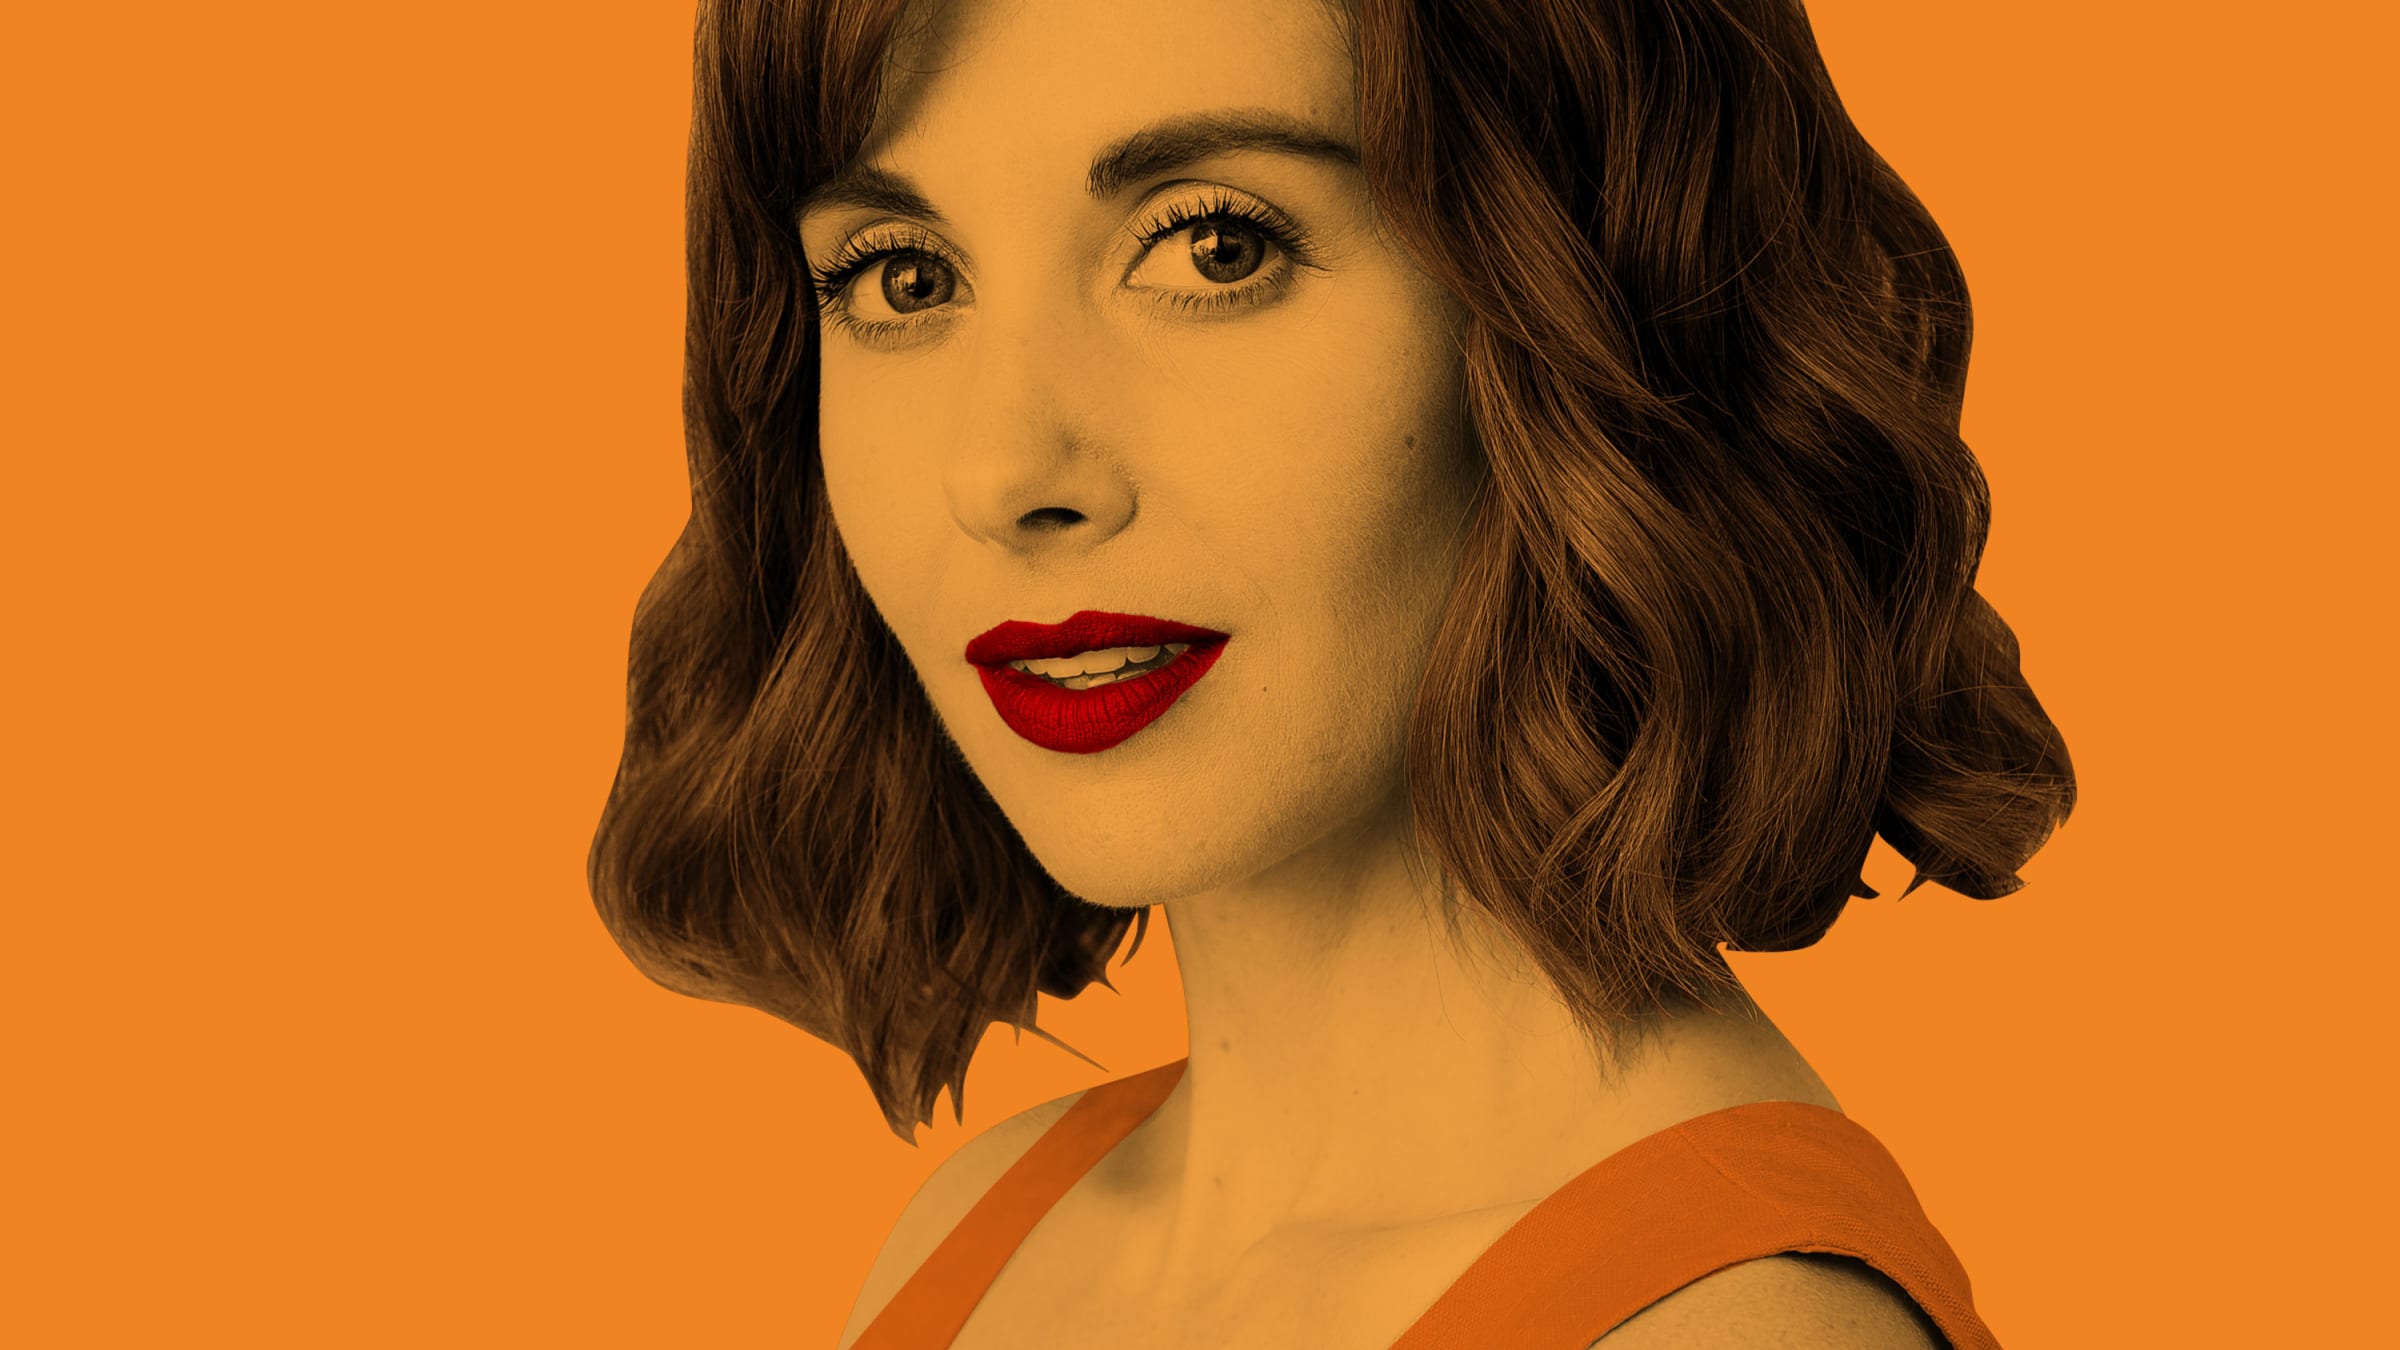 Alison Brie on Making Out With Aubrey Plaza and the Strange, Sad Death of GLOW pic